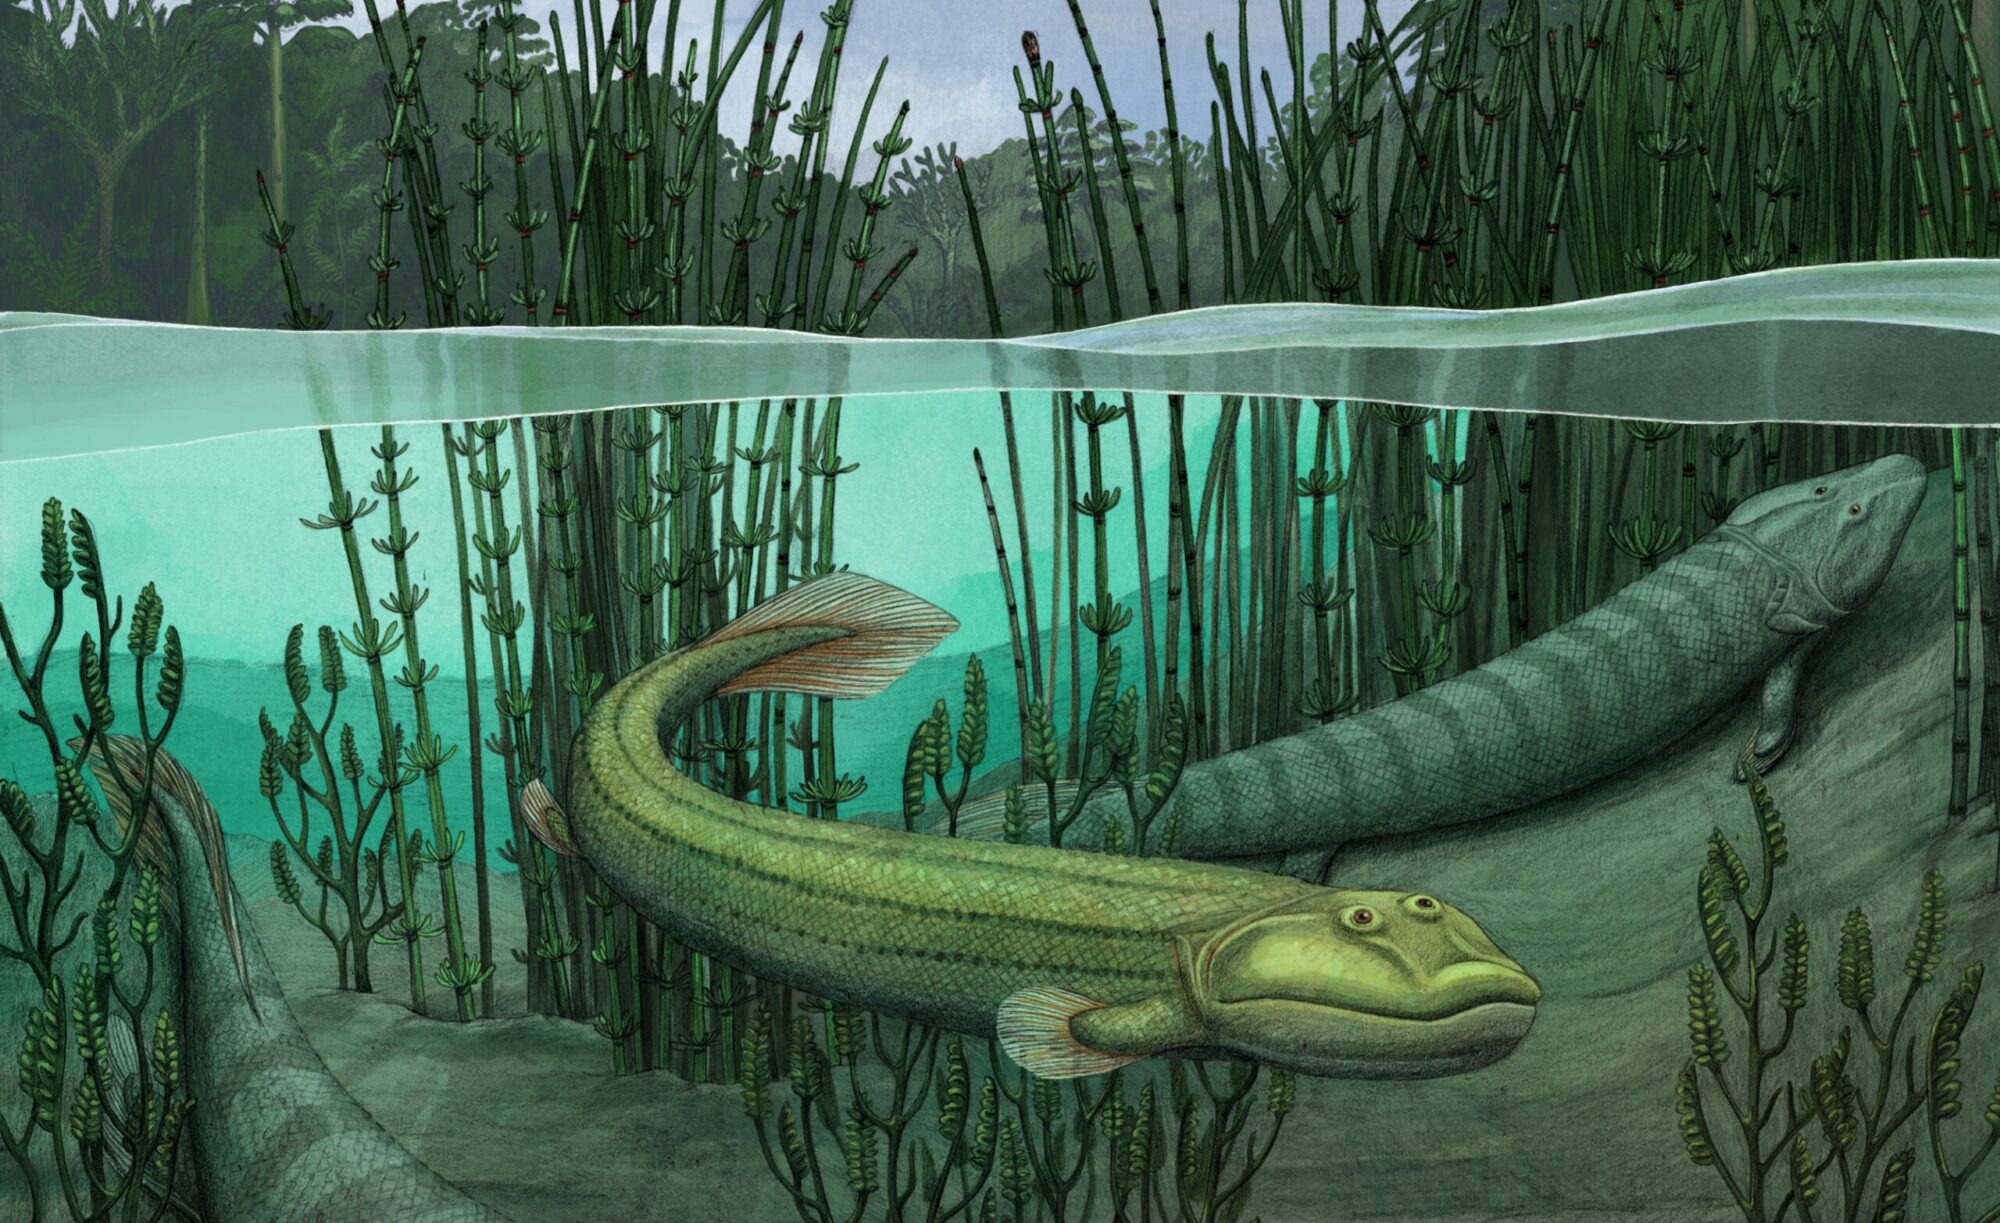 Tiktaalik’s ancient cousin decided life was better in the water